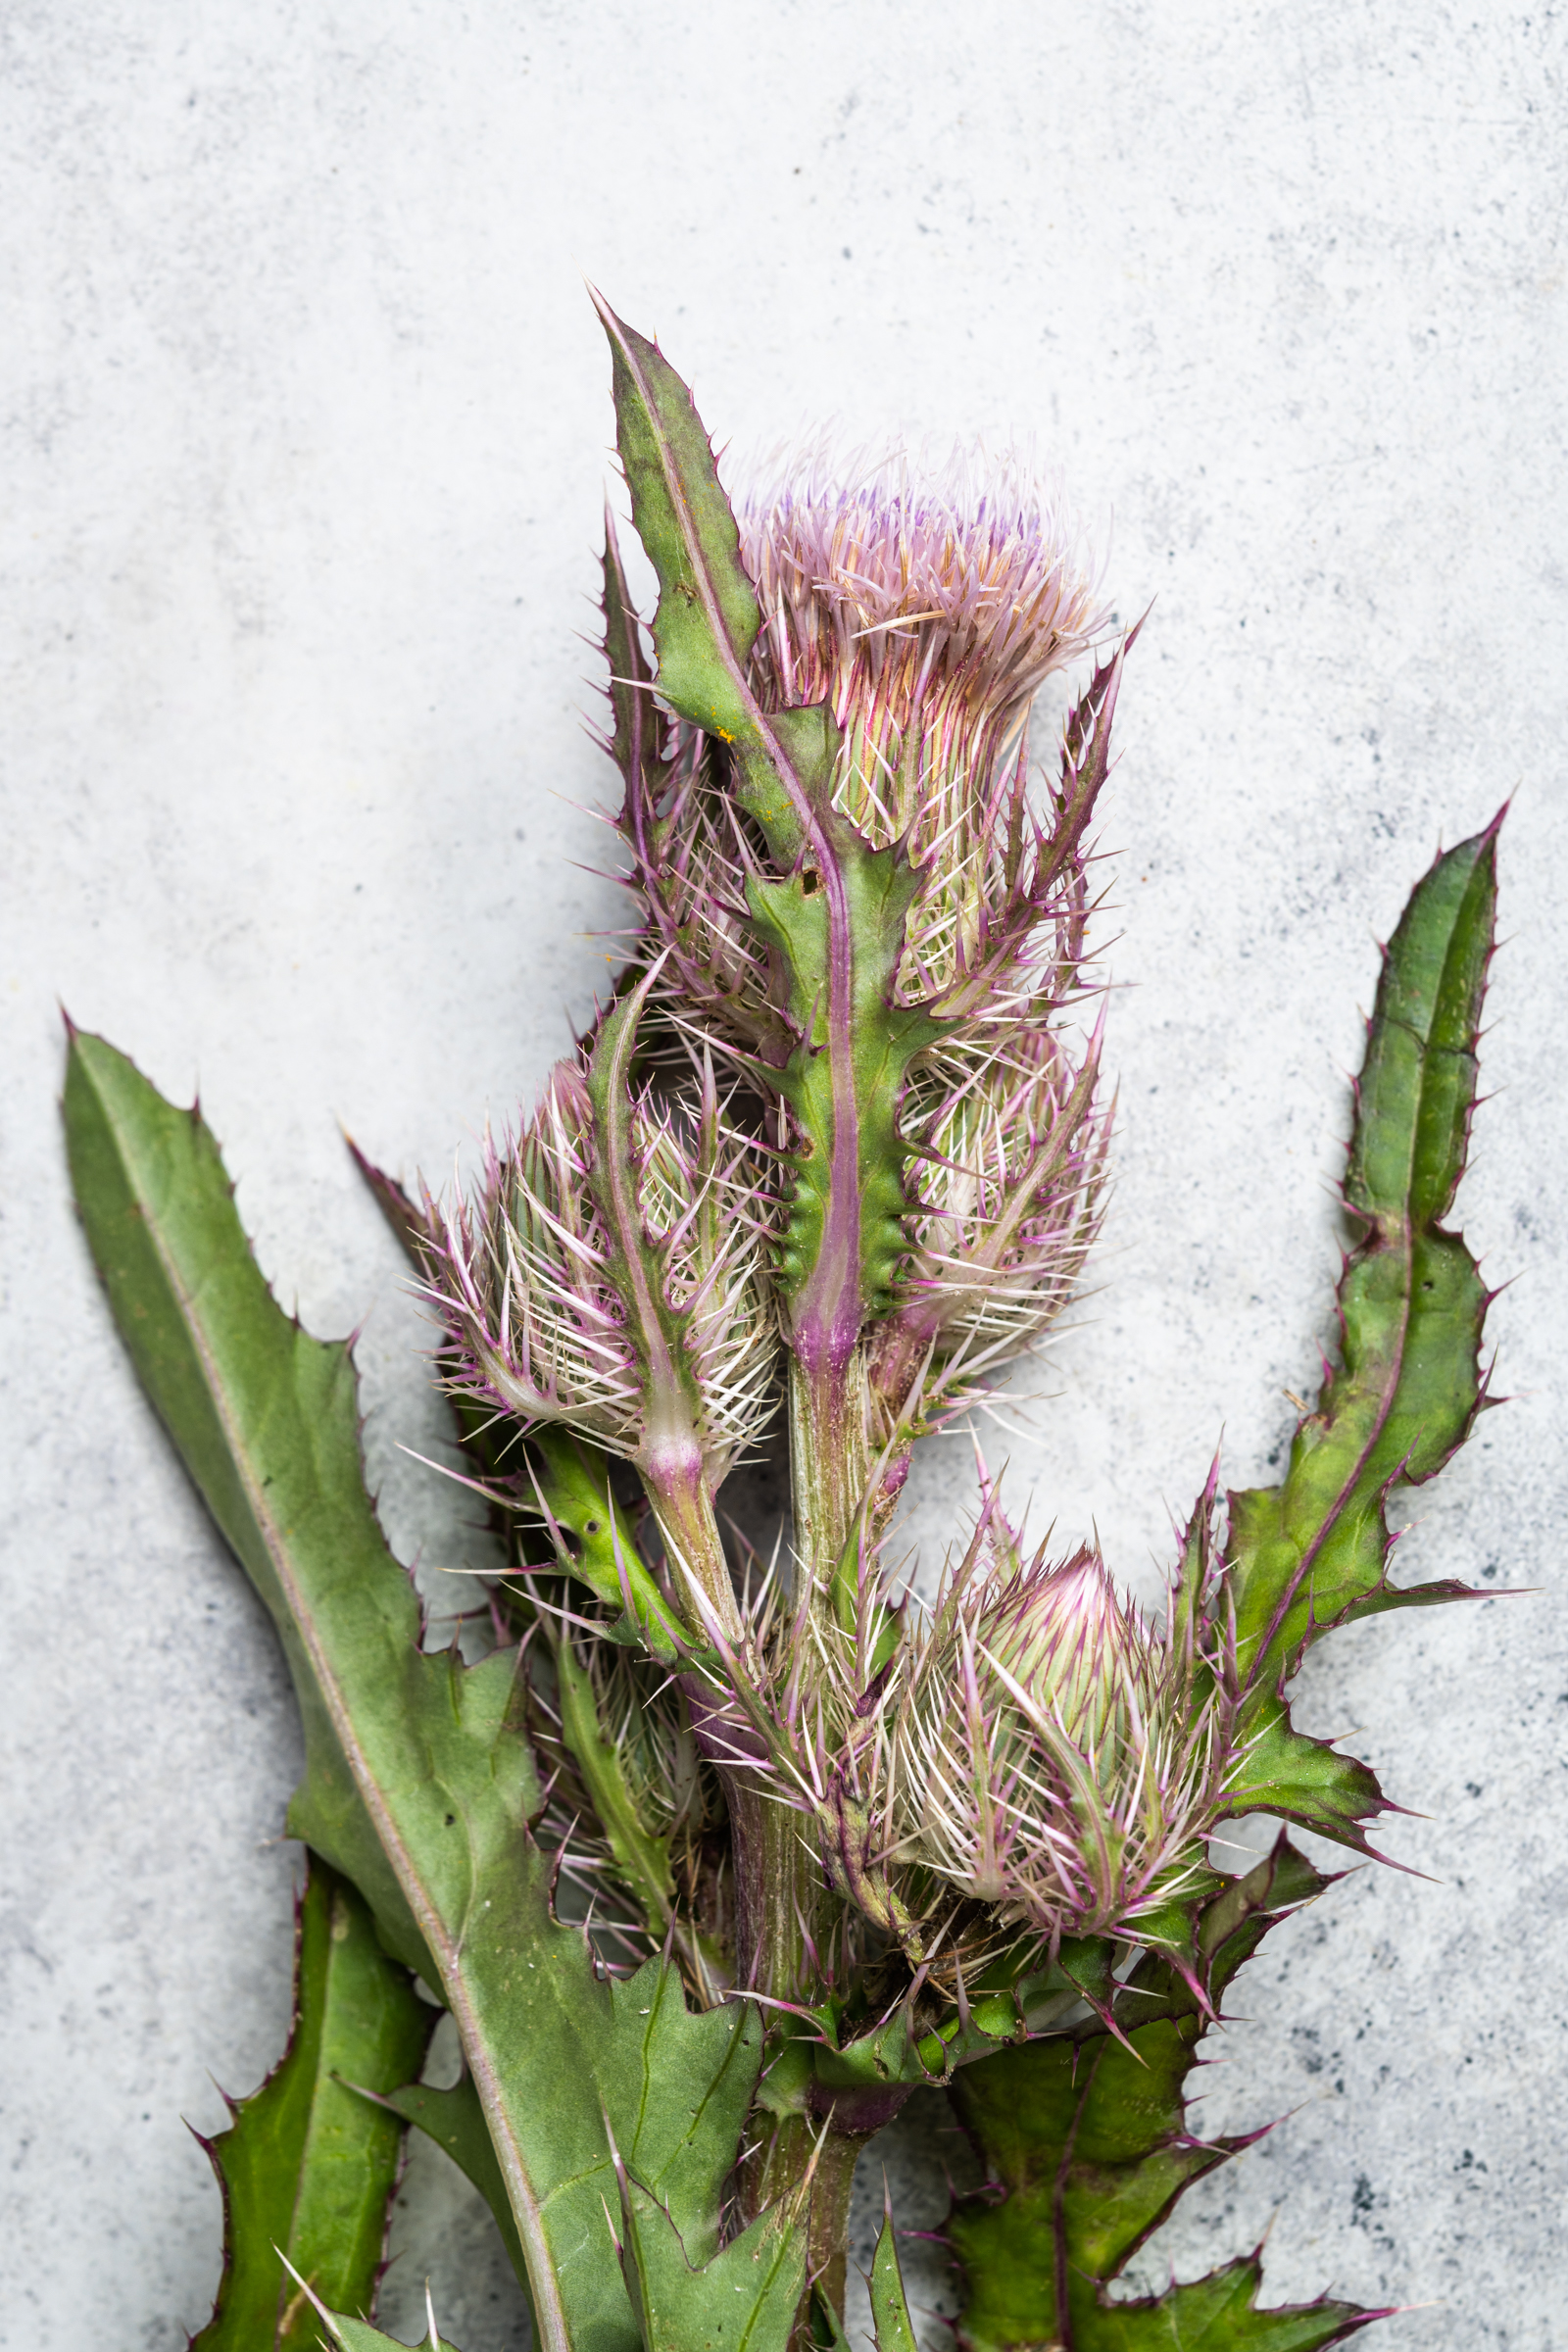 Purple thistle, known in South Louisiana as chadron